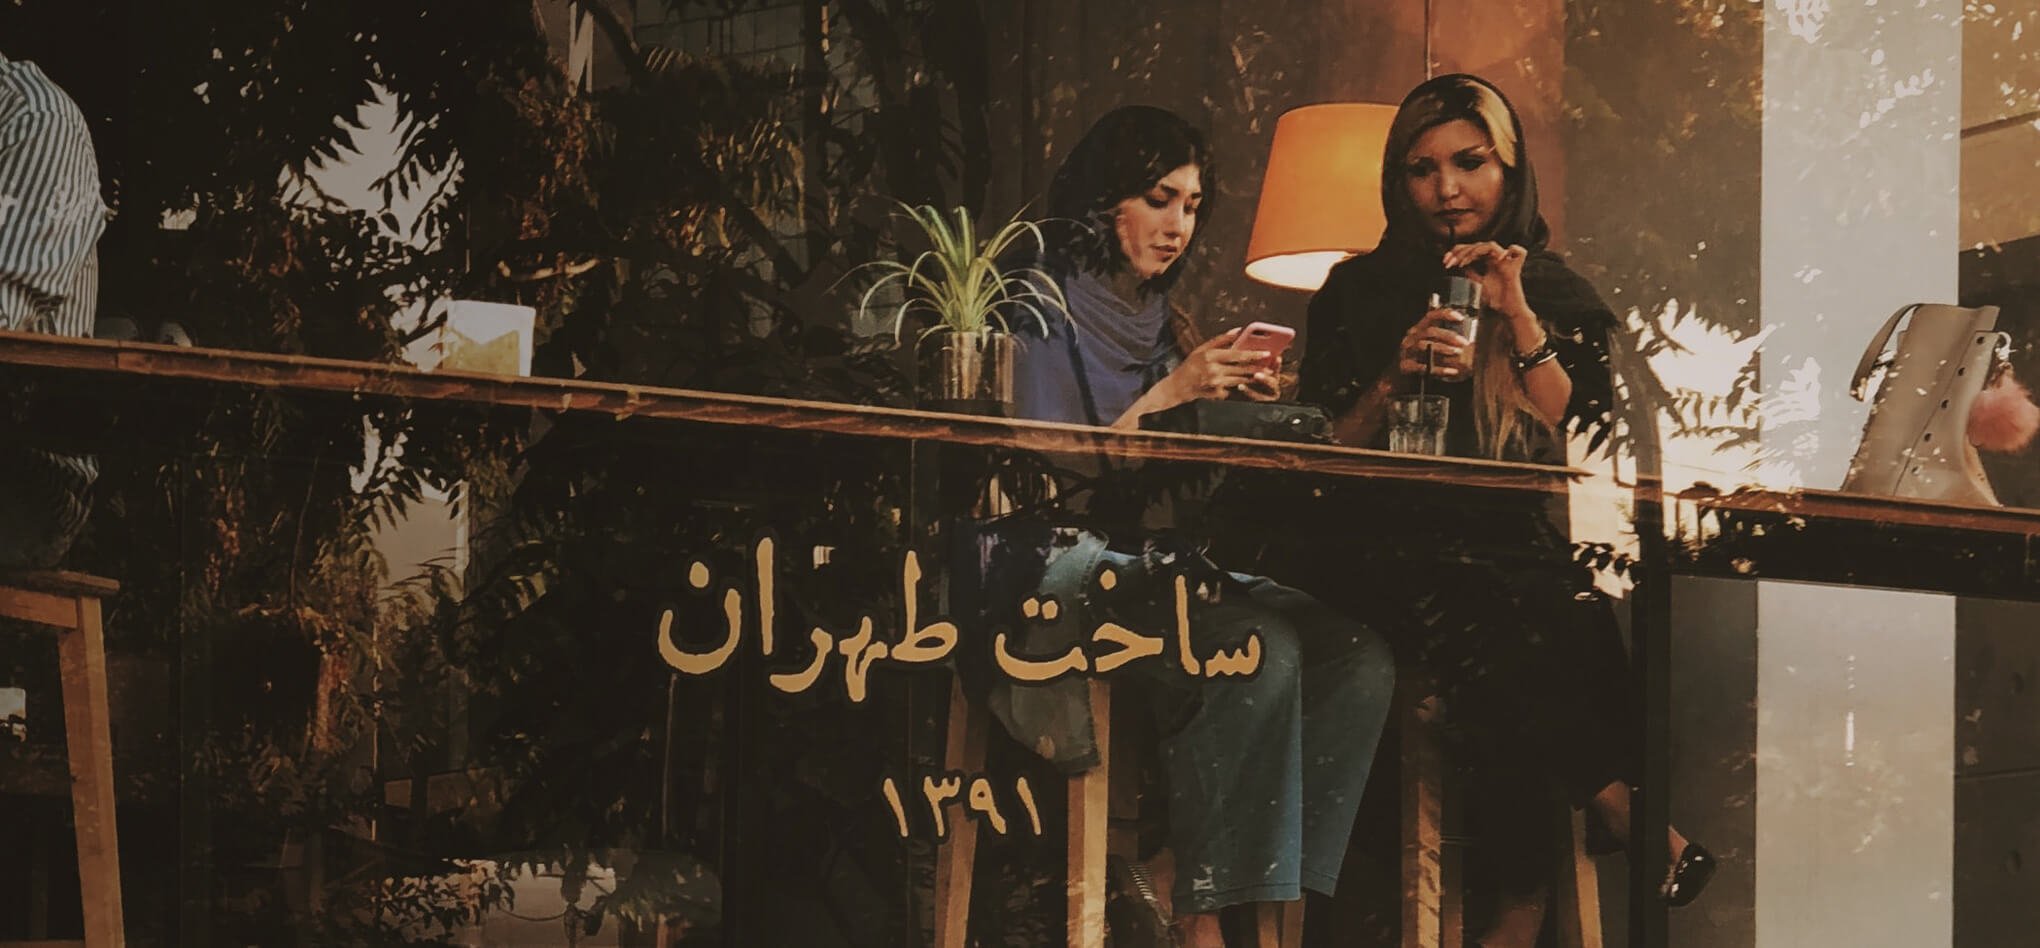 Iran: Prison for two women involved in house churches